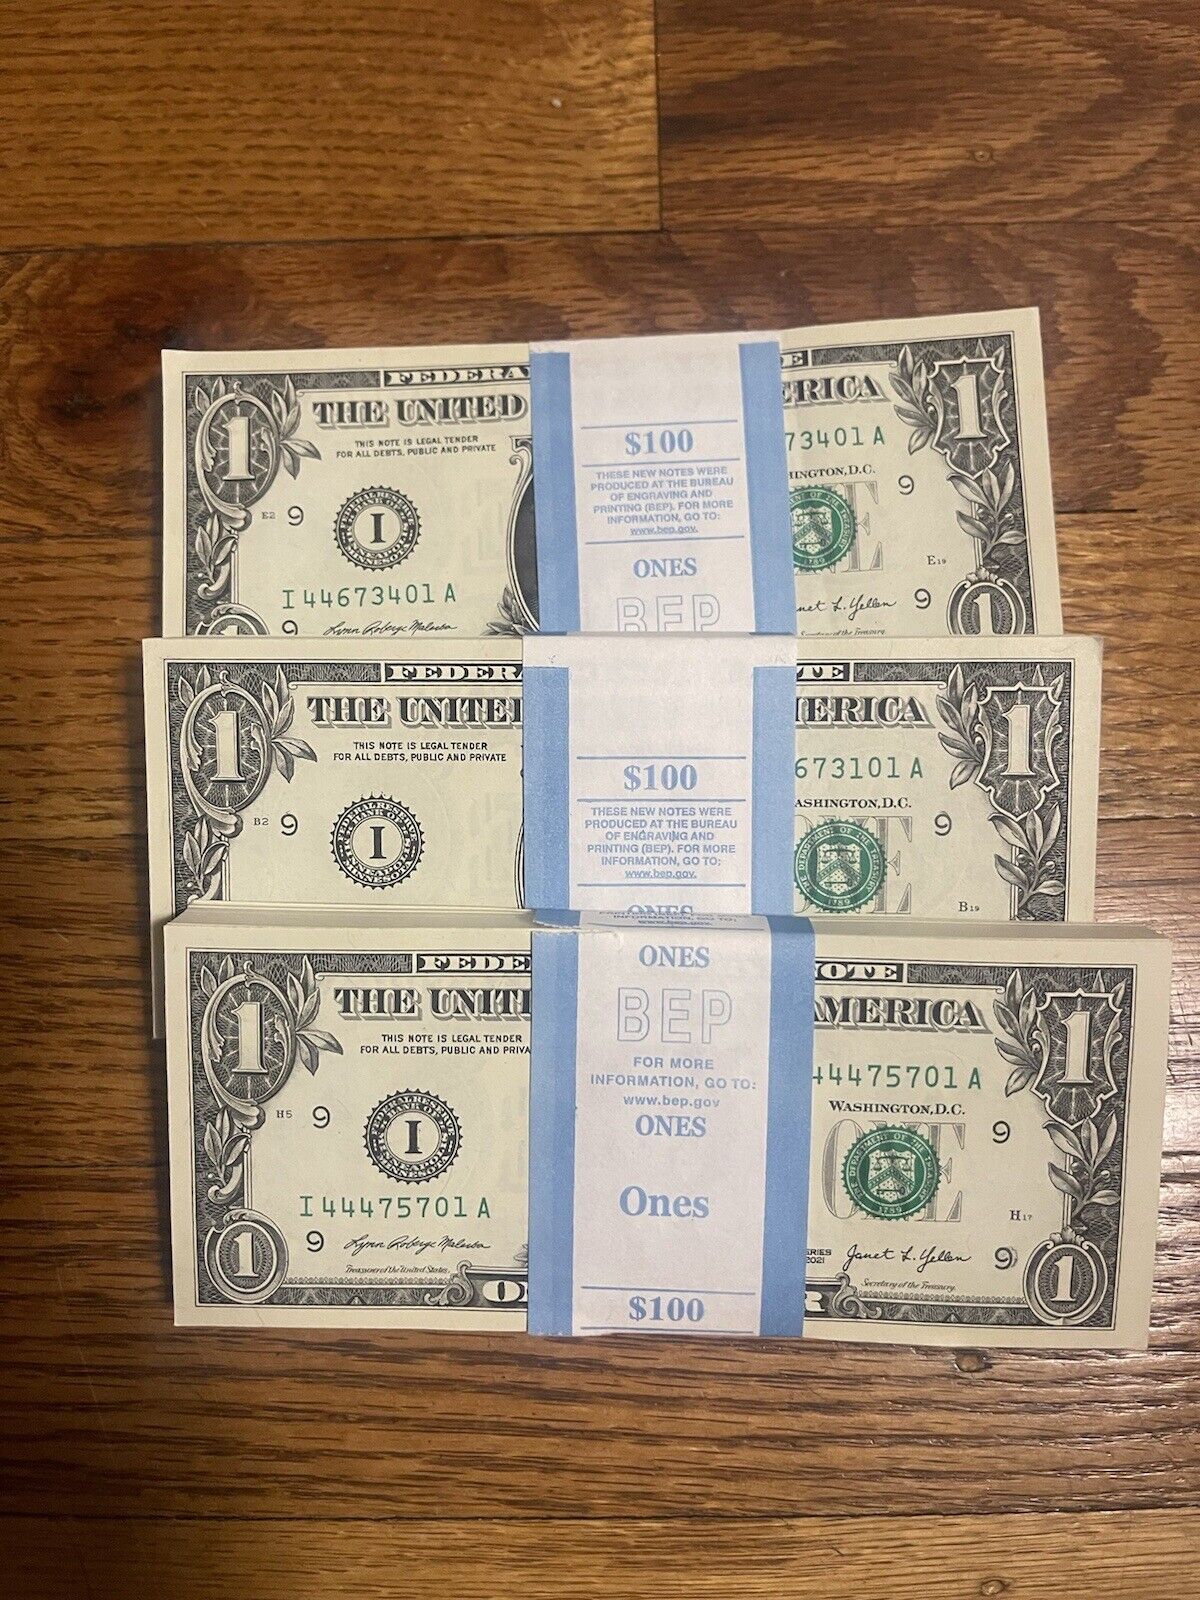 NEW CRISP Uncirculated ONE Dollar Bills  $1 Sequential Bank Notes Lot of 300